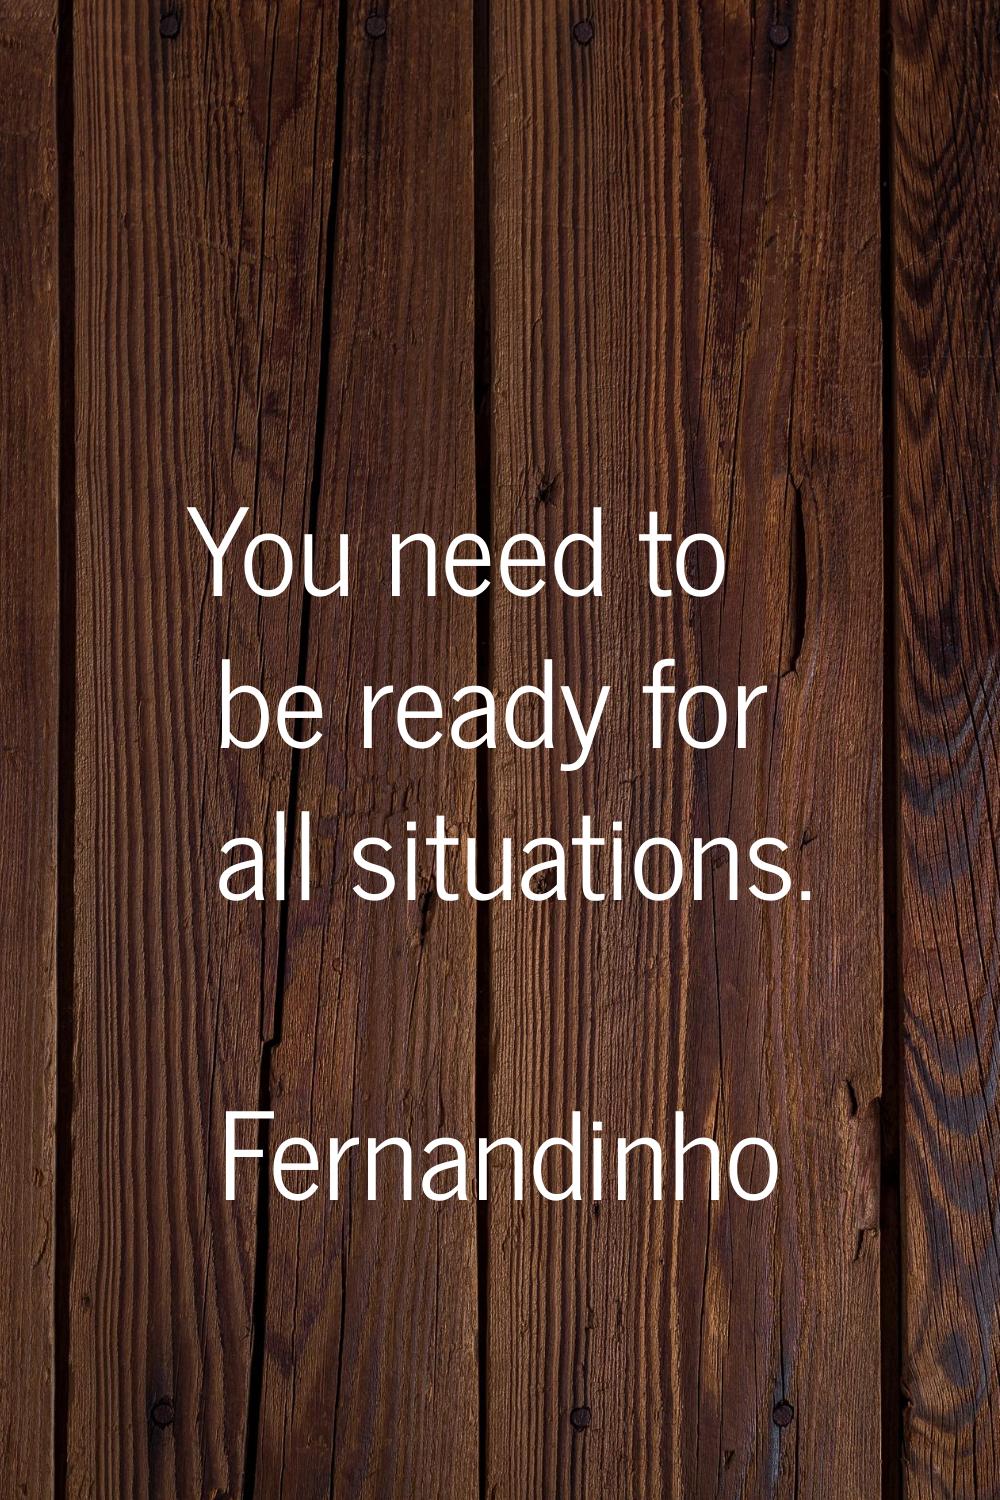 You need to be ready for all situations.